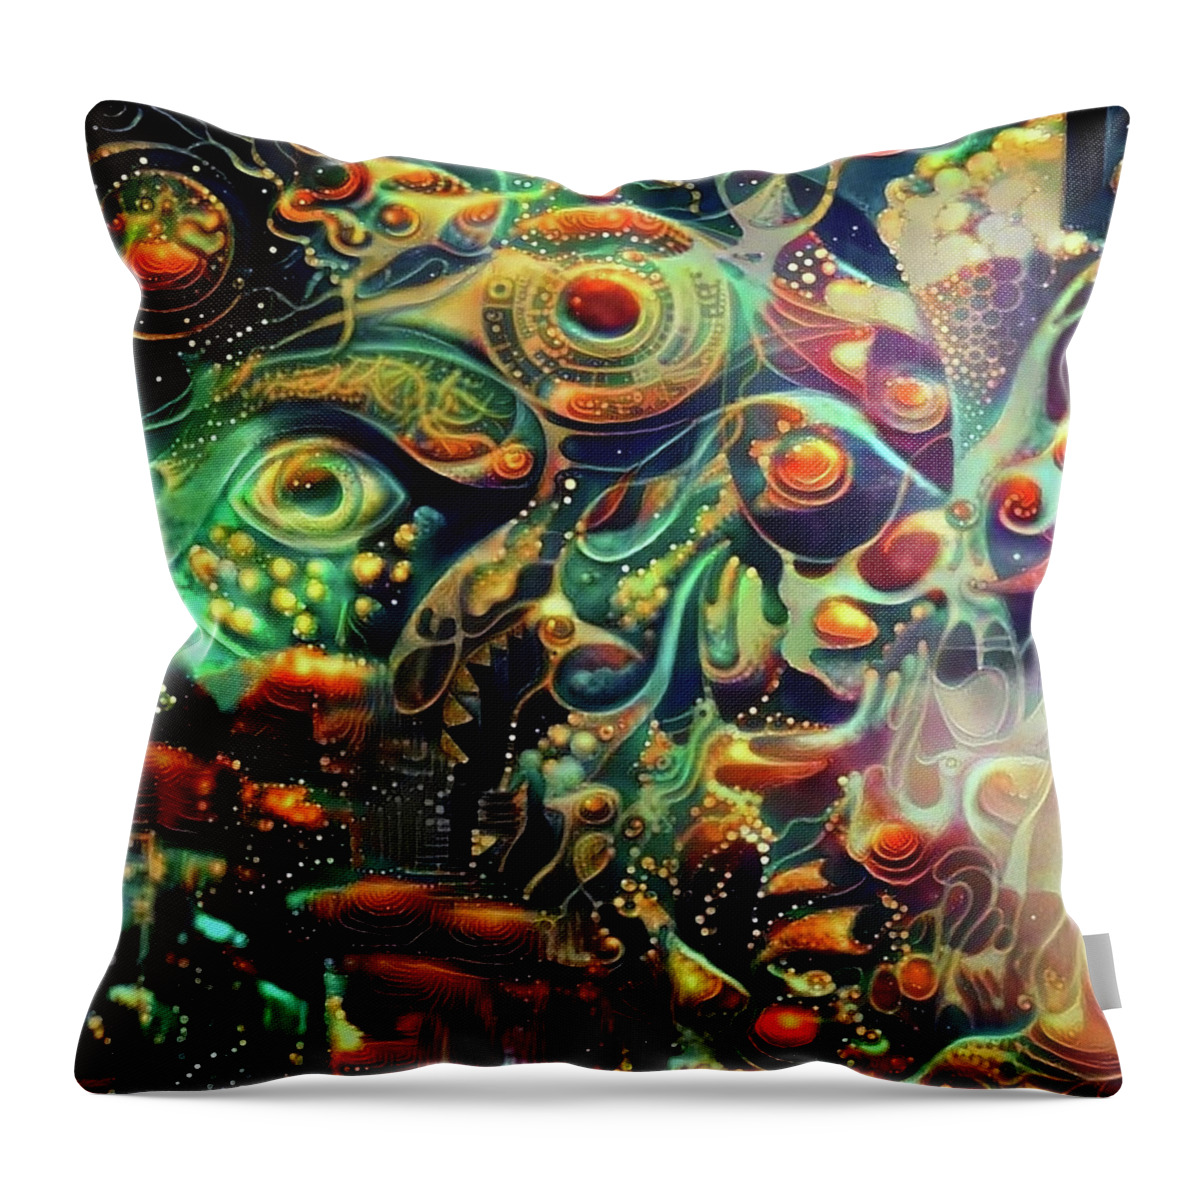 Abstract Throw Pillow featuring the digital art Vivid Masquerade by Bruce Rolff